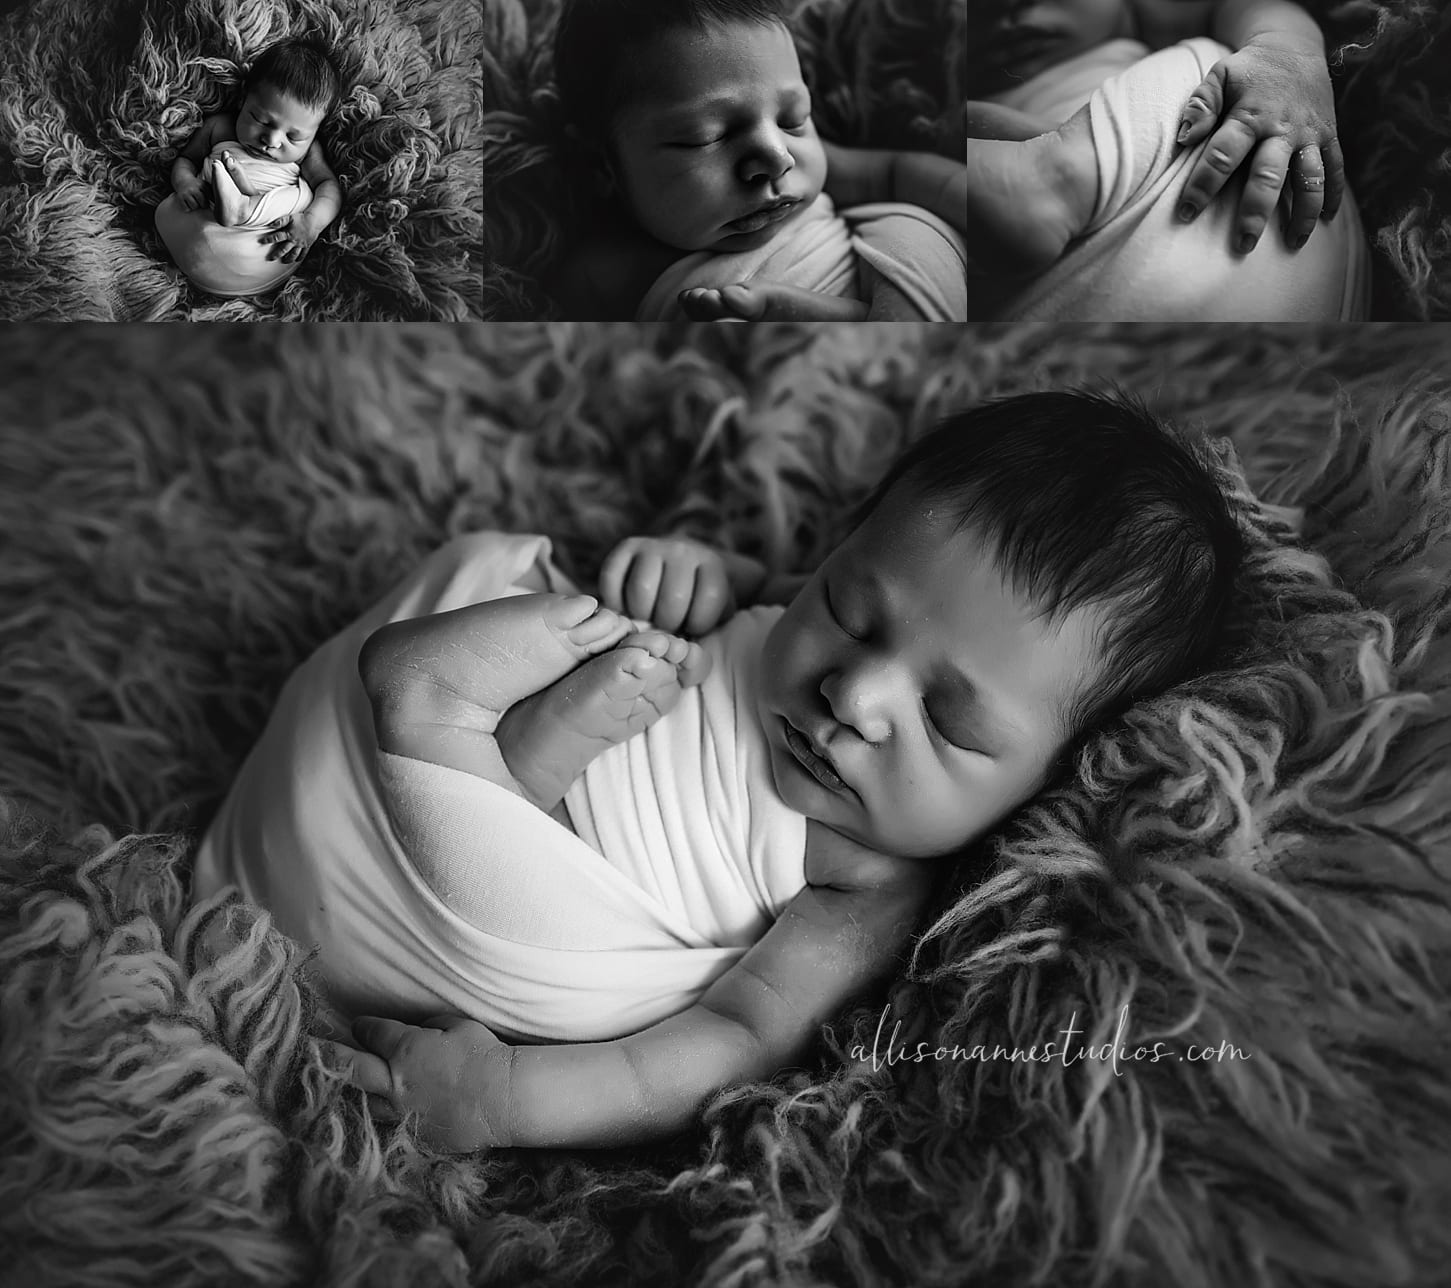 Trey, Rainbow baby, joy, loss, First Year Journey, hope is the thing with feathers, love, dolly Priss, Cora & Viole, Hammonton, best newborn photographer in south jersey, Allison Gallagher, AllisonAnne Studios